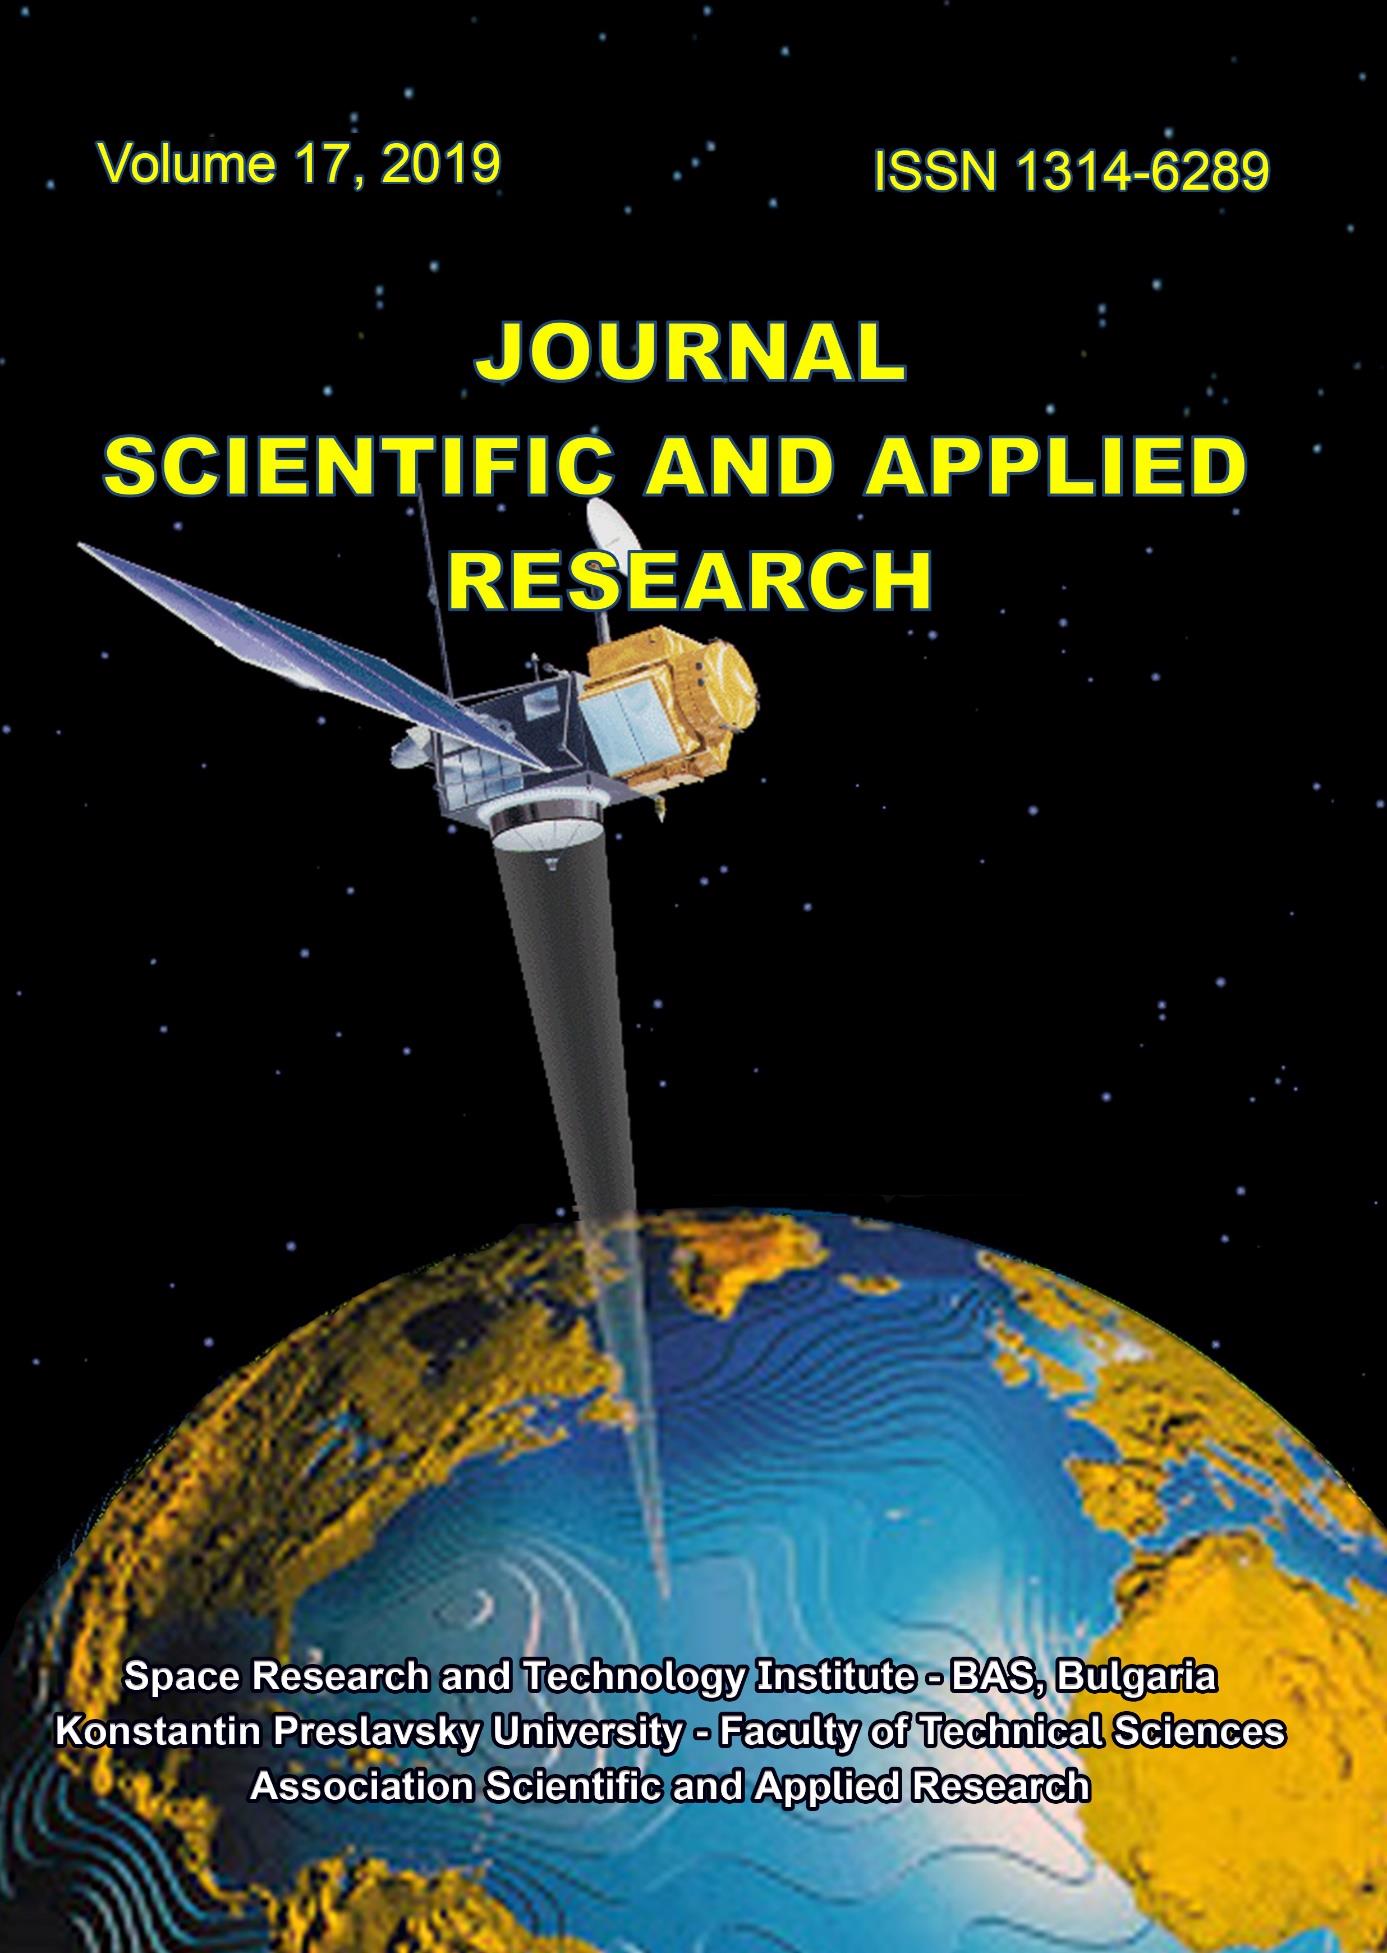 					View Vol. 17 No. 1 (2019): Journal Scientific and Applied Research
				